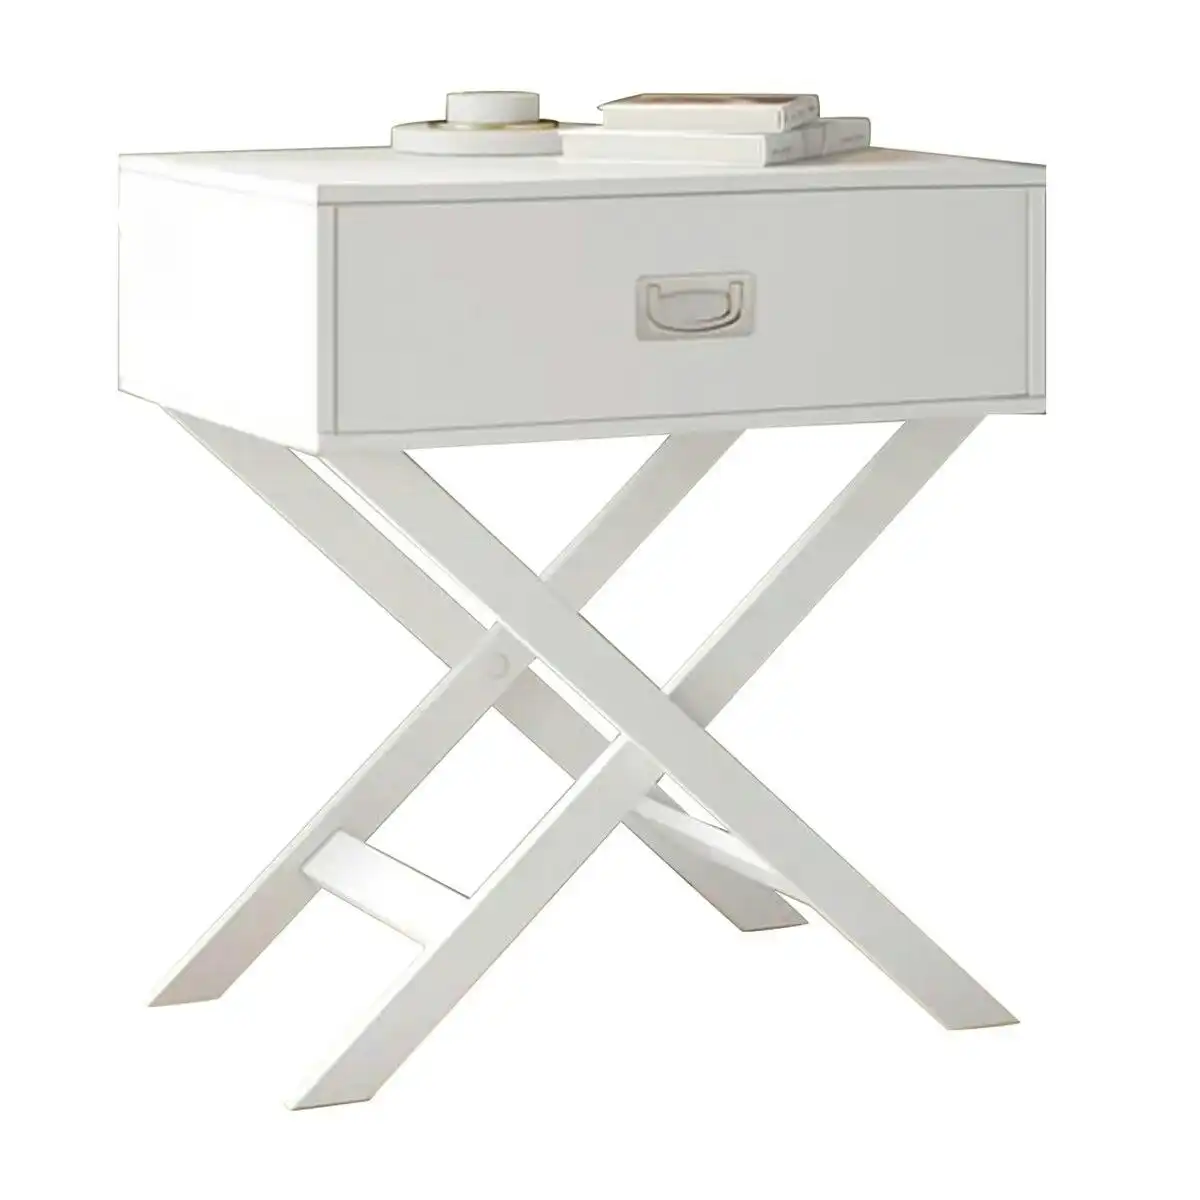 Ausway White Bedside End Table With Drawer Storage Cabinet Modern Small Nightstand Wooden Living Room